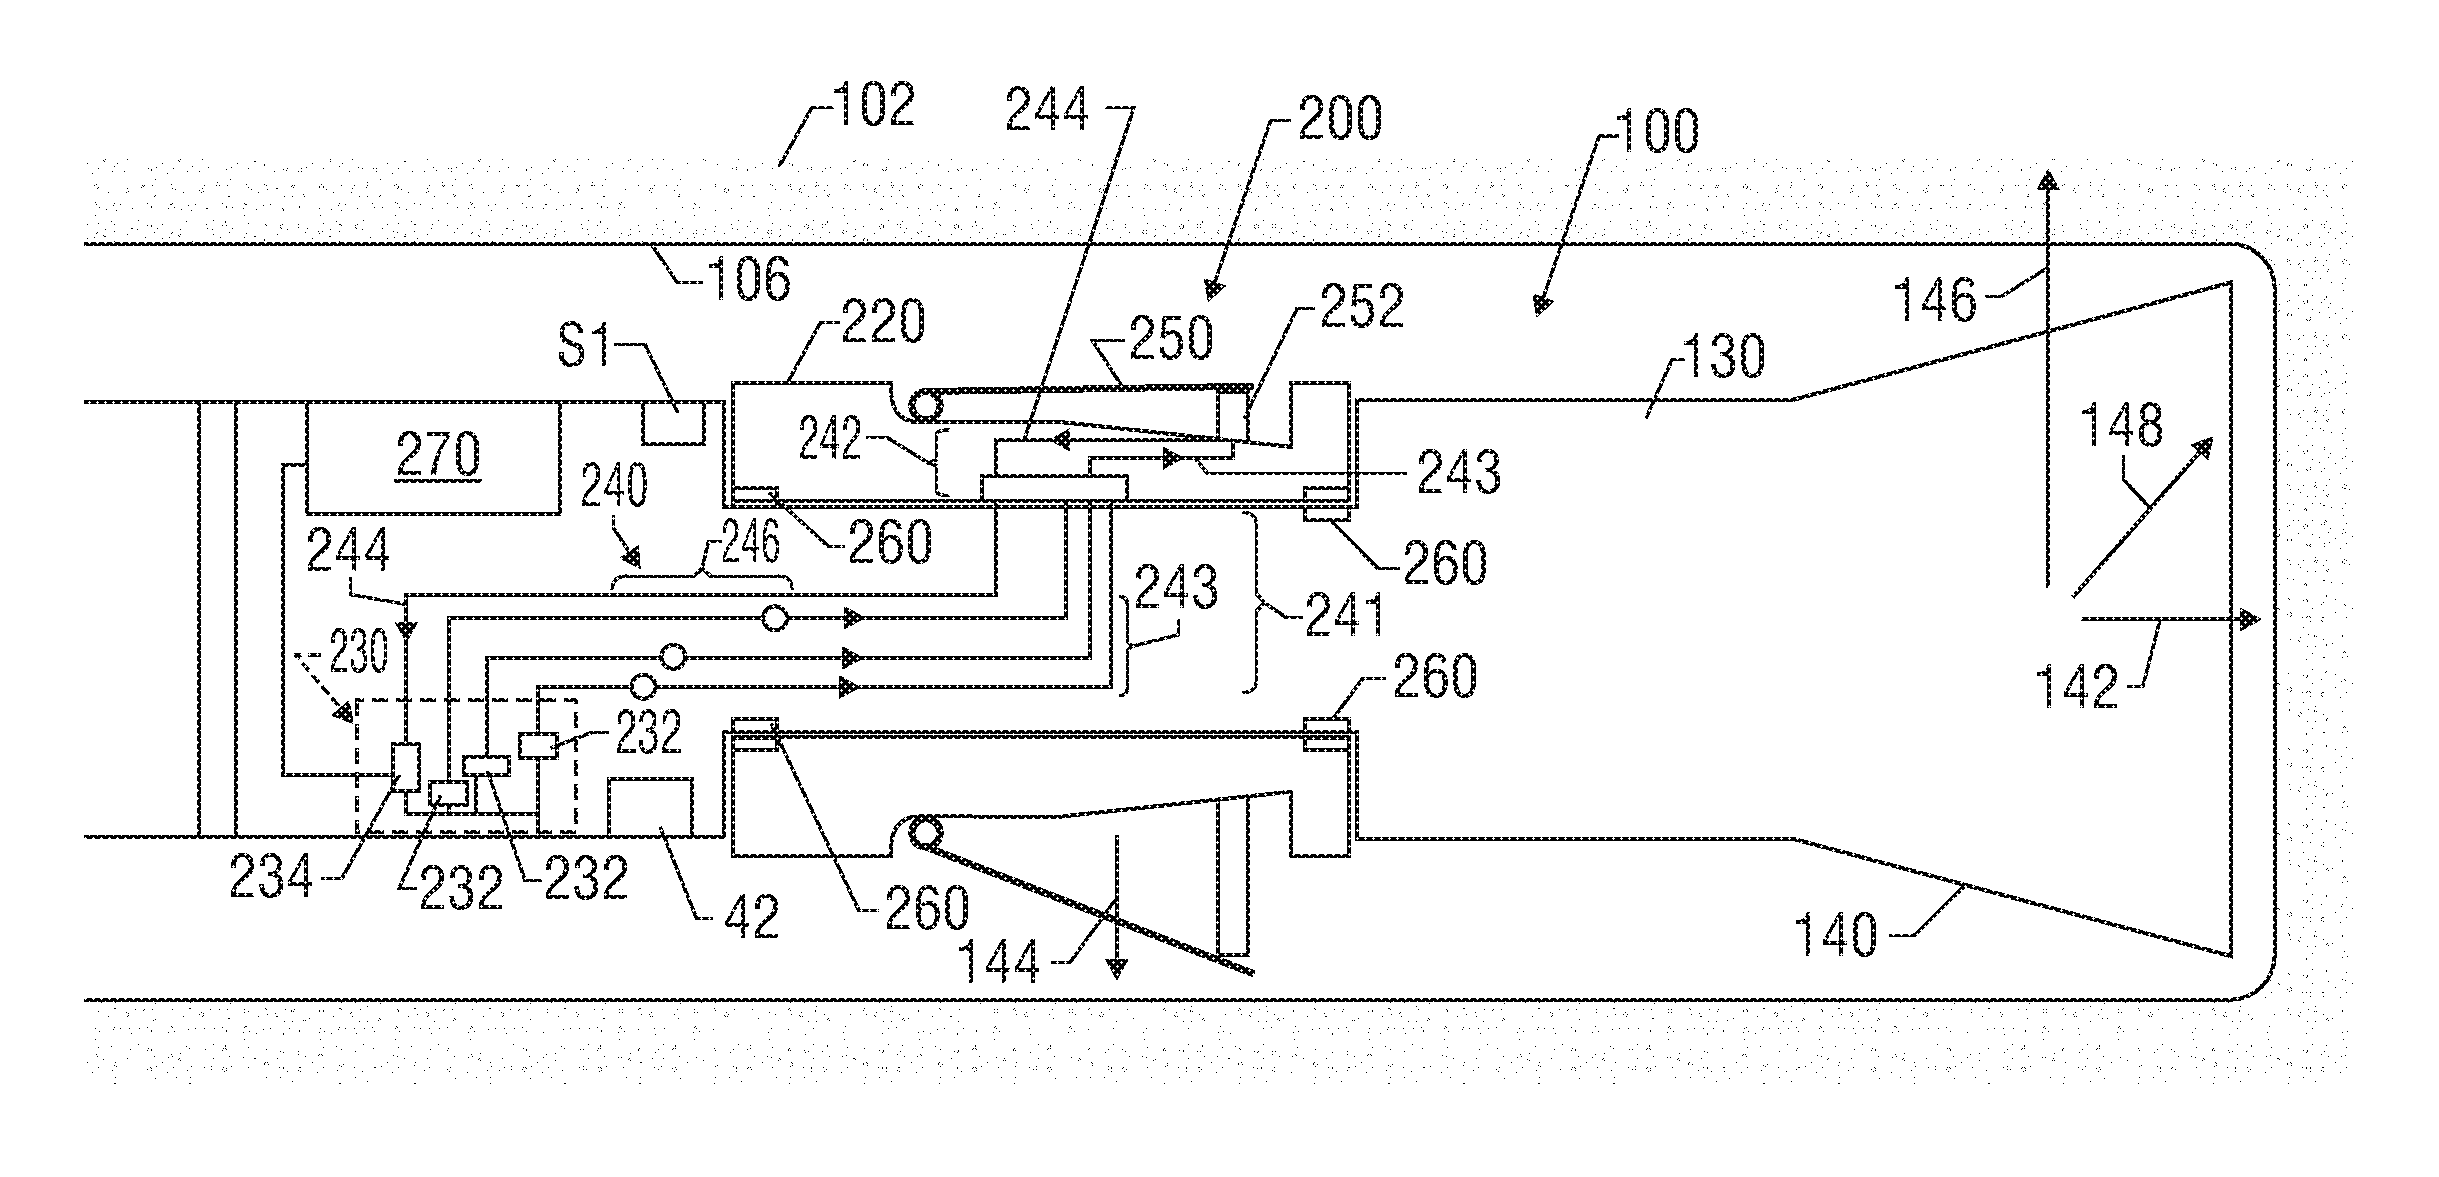 Closed loop drilling assembly with electronics outside a non-rotating sleeve